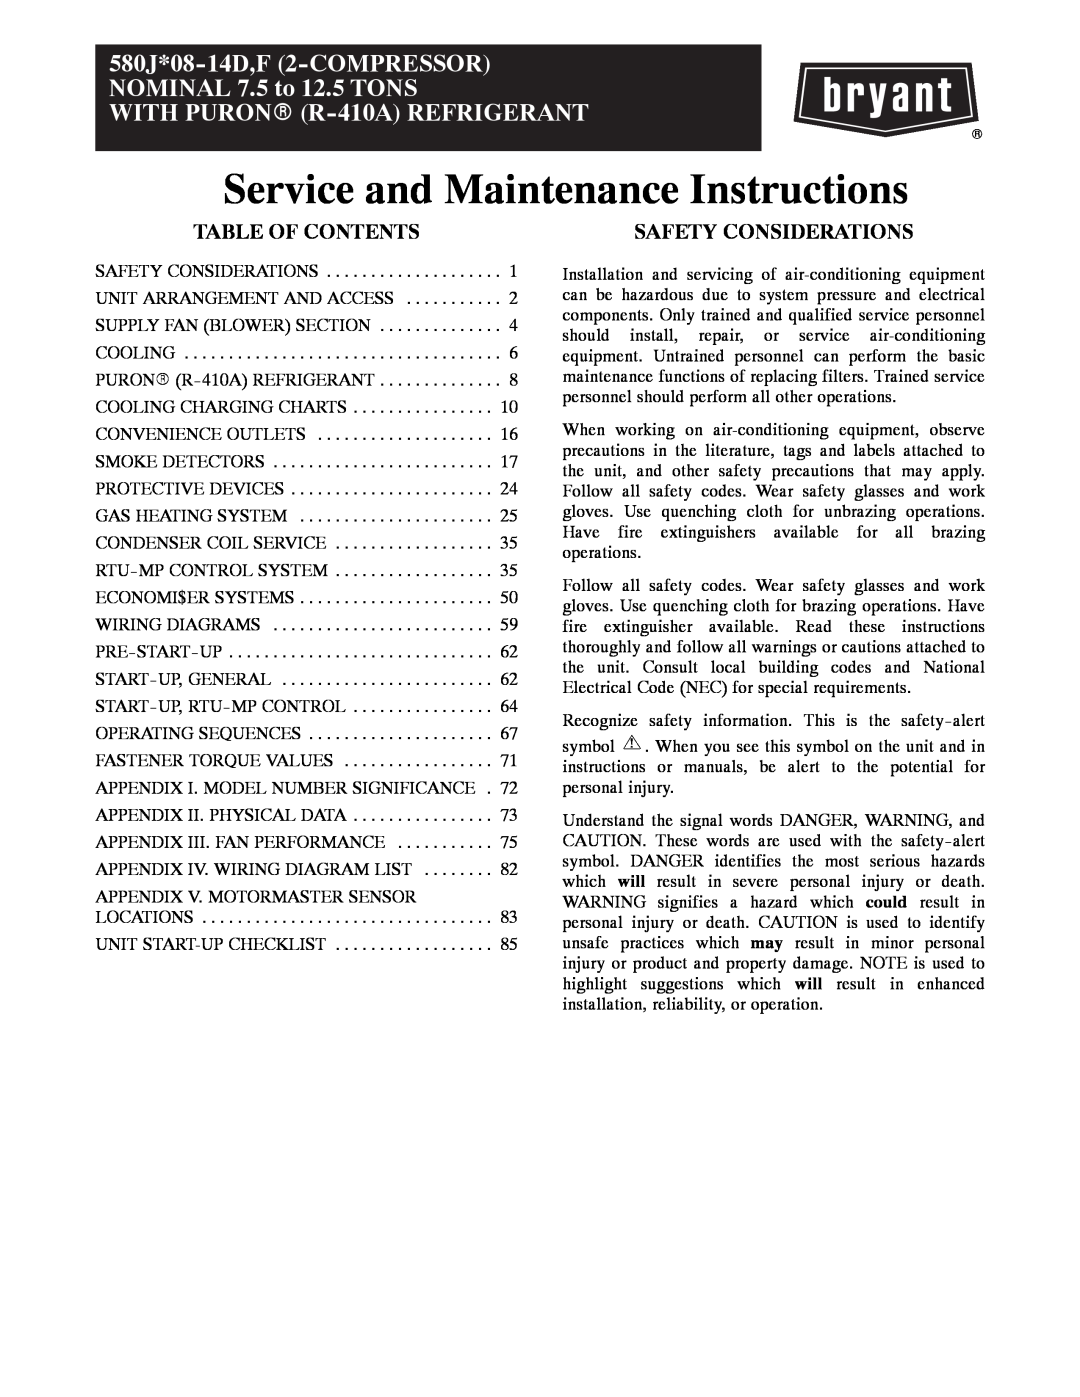 Bryant 580J*08--14D, F appendix Table Of Contents, Safety Considerations, Service and Maintenance Instructions 